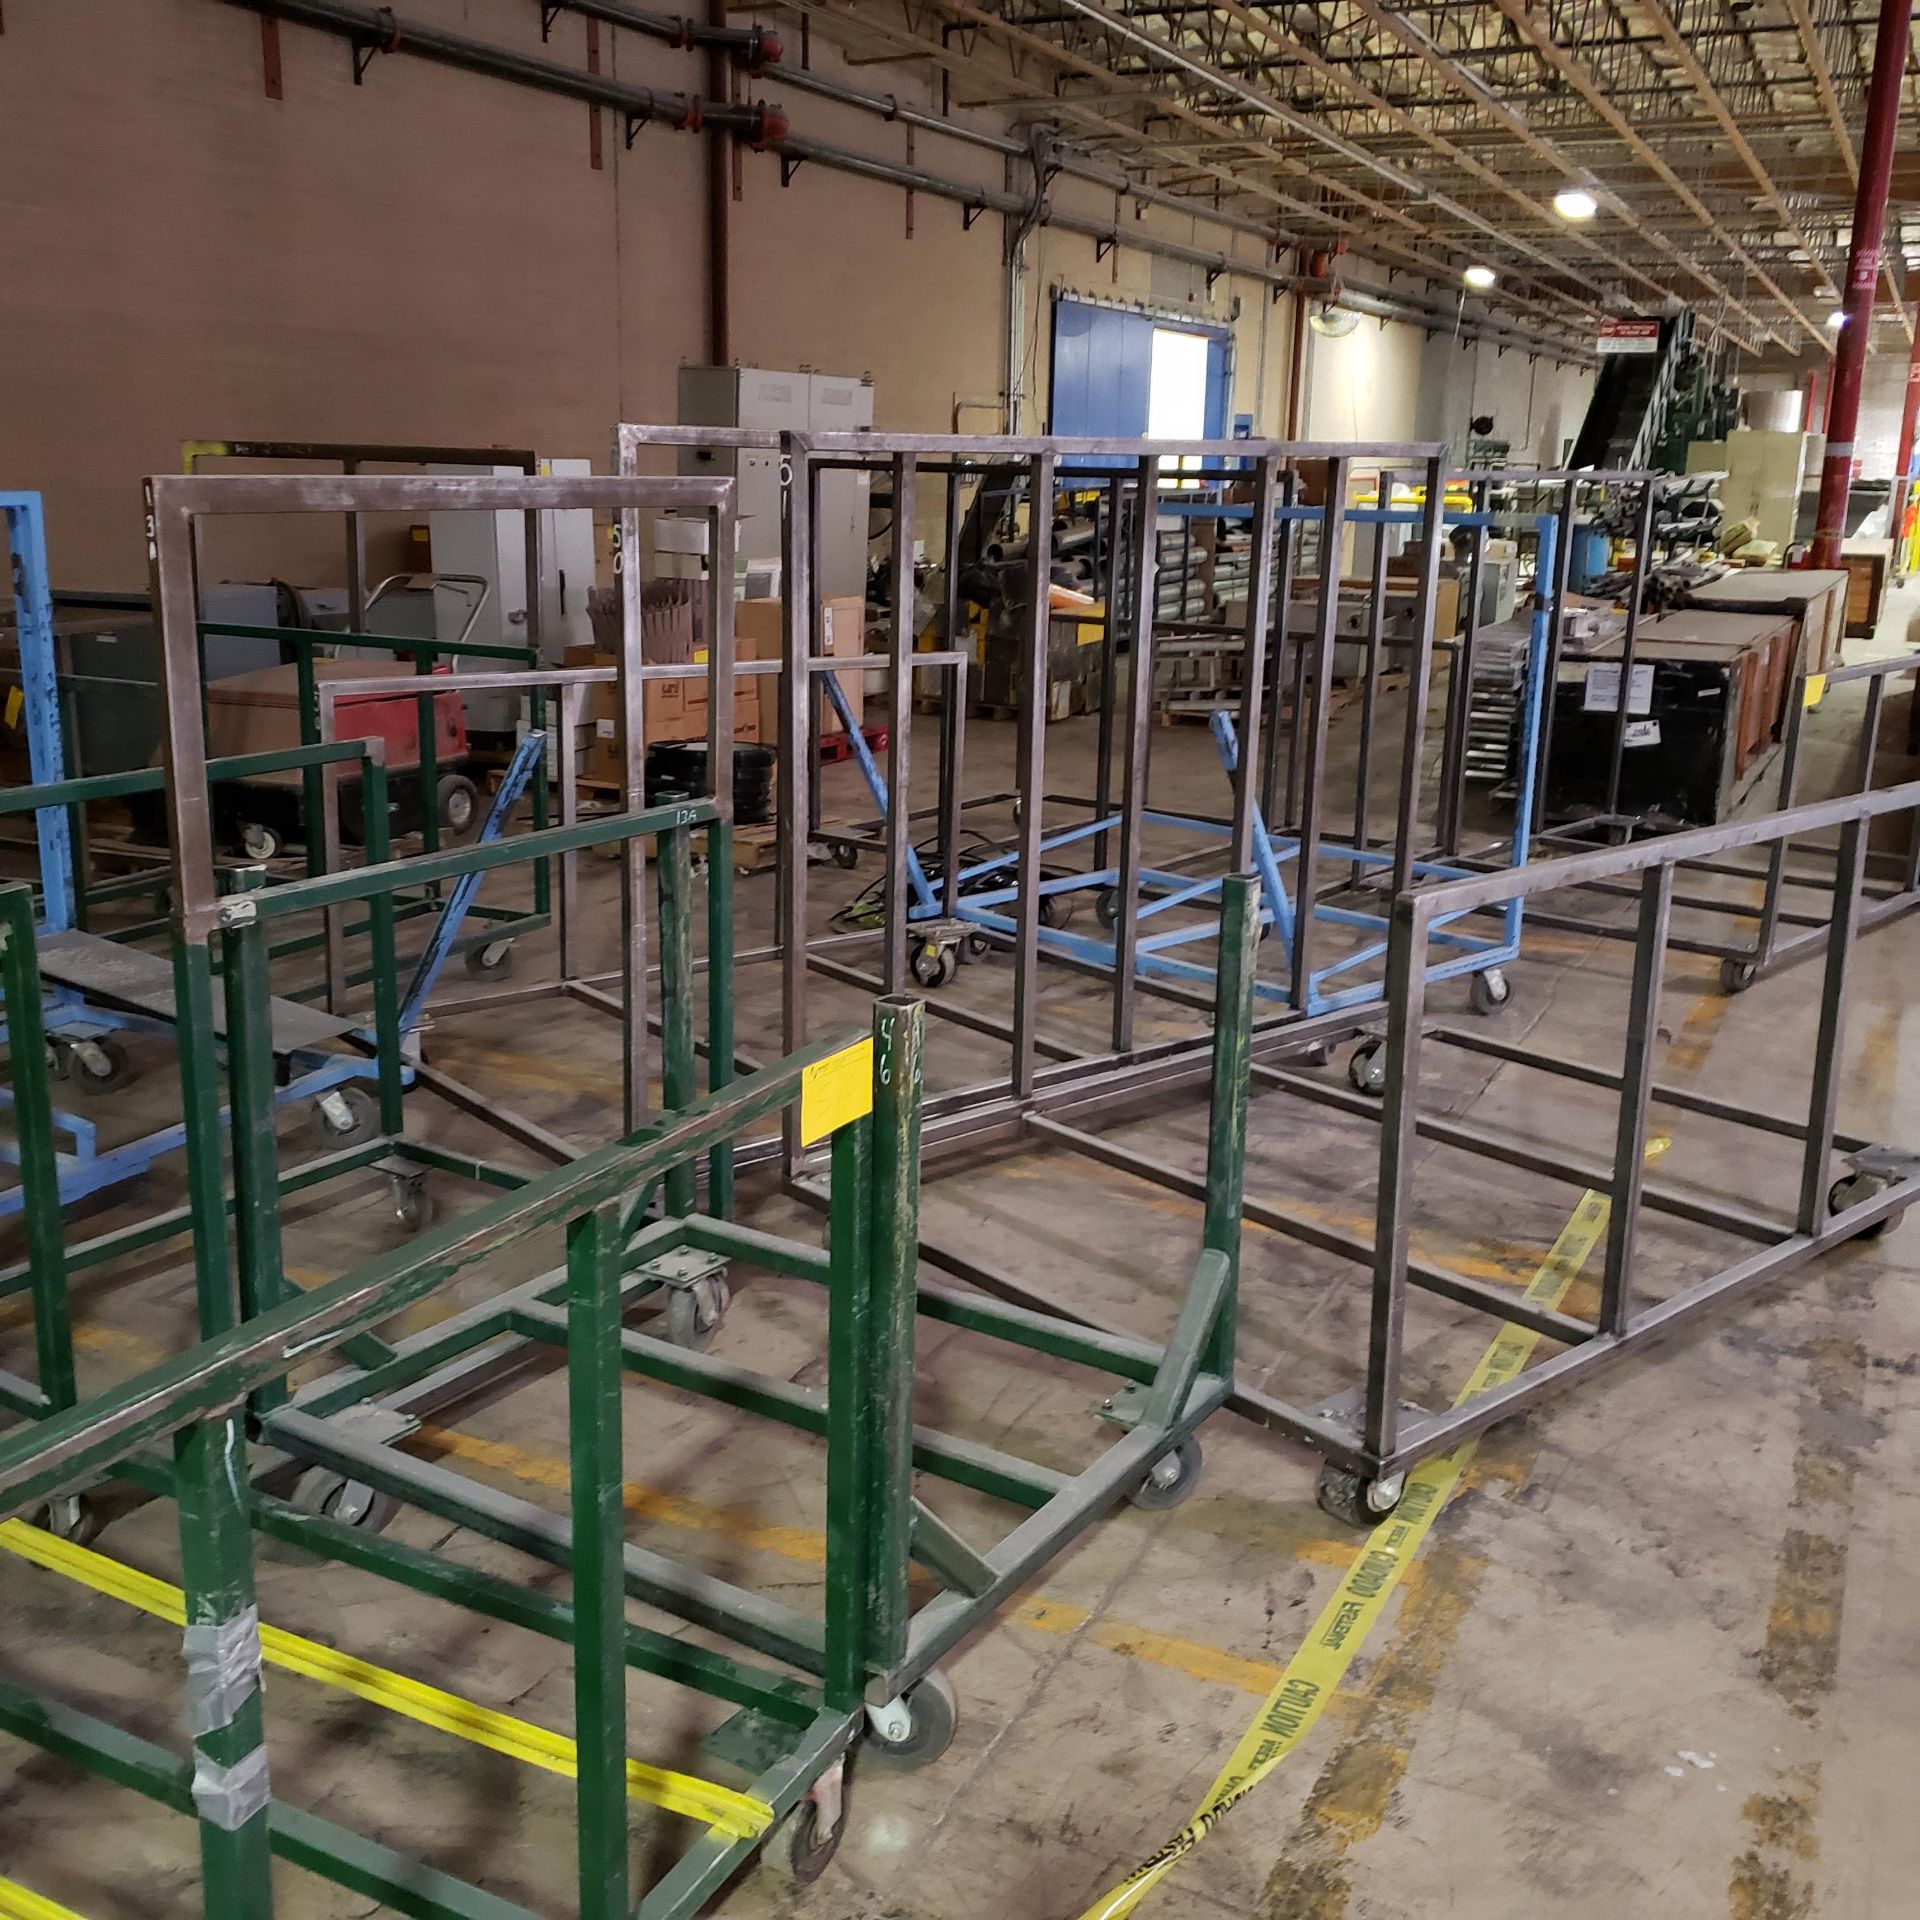 CORE CARTS, ALL WITH CASTERS, DIFFERENT SIZES 34 TOTAL CARTS (WAREHOUSE STORAGE0 - Image 3 of 7